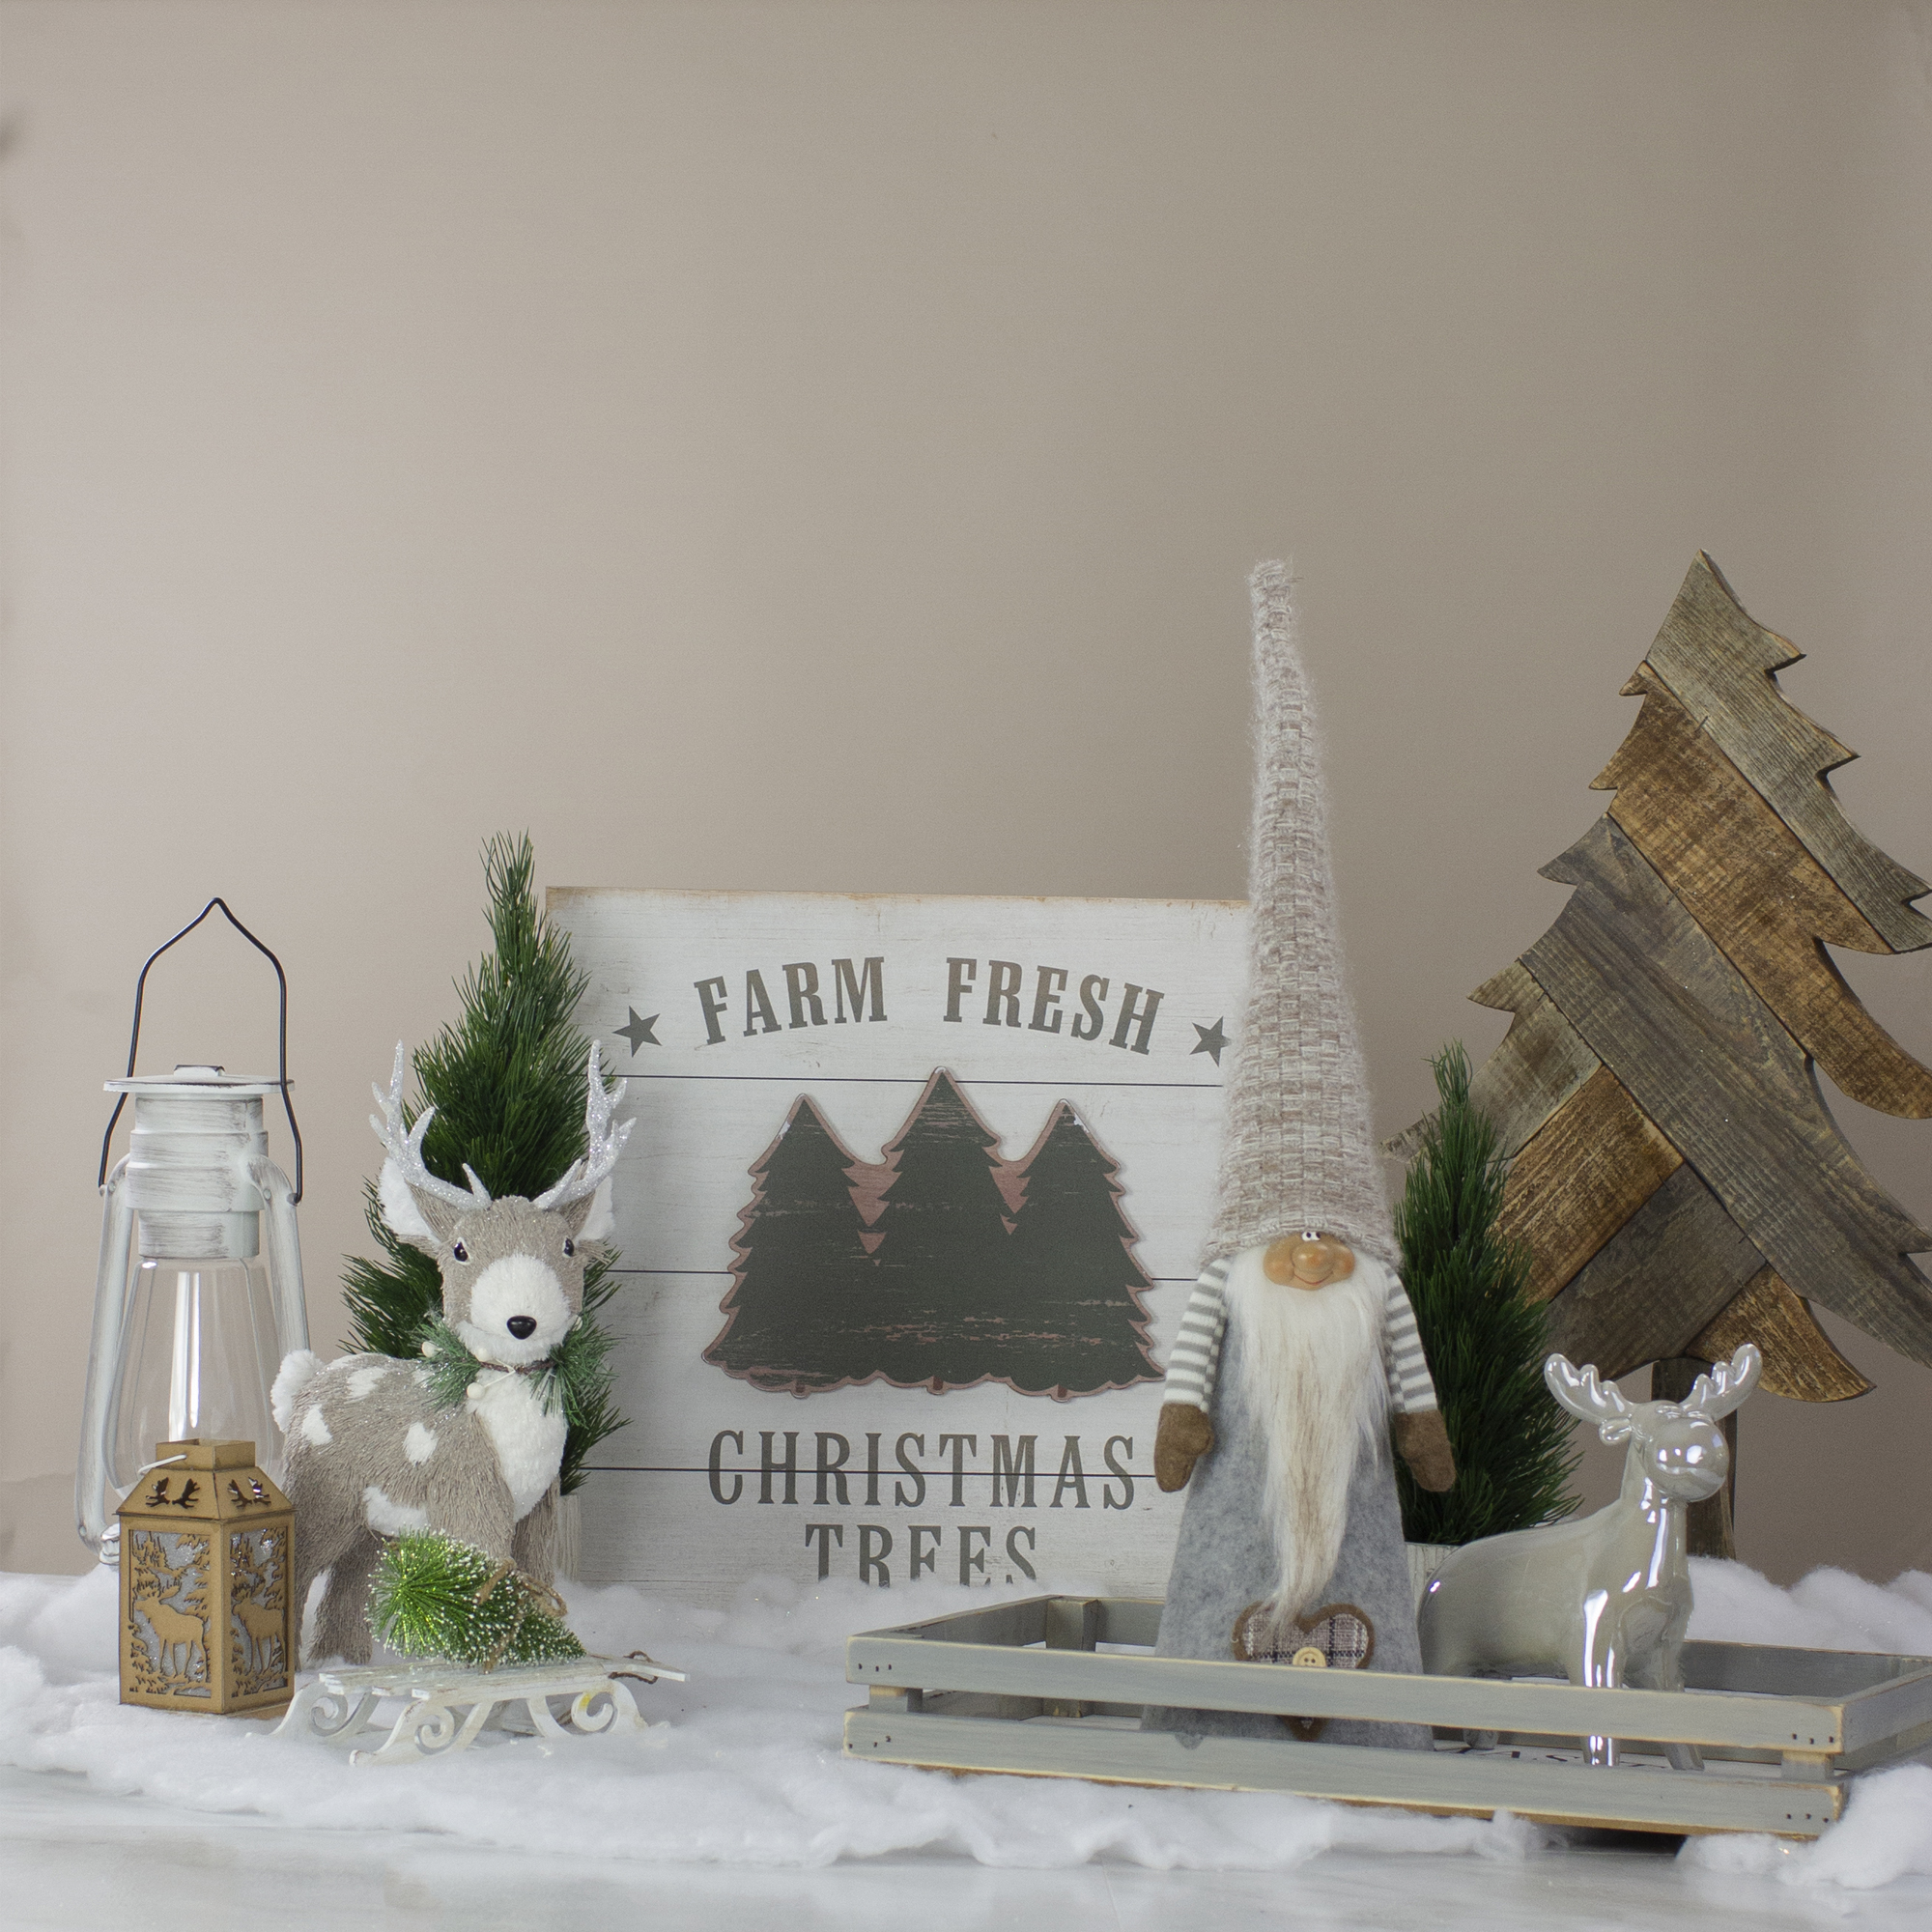 Northlight 16" White Washed Farm Fresh Christmas Trees Wooden Wall Sign - image 2 of 5